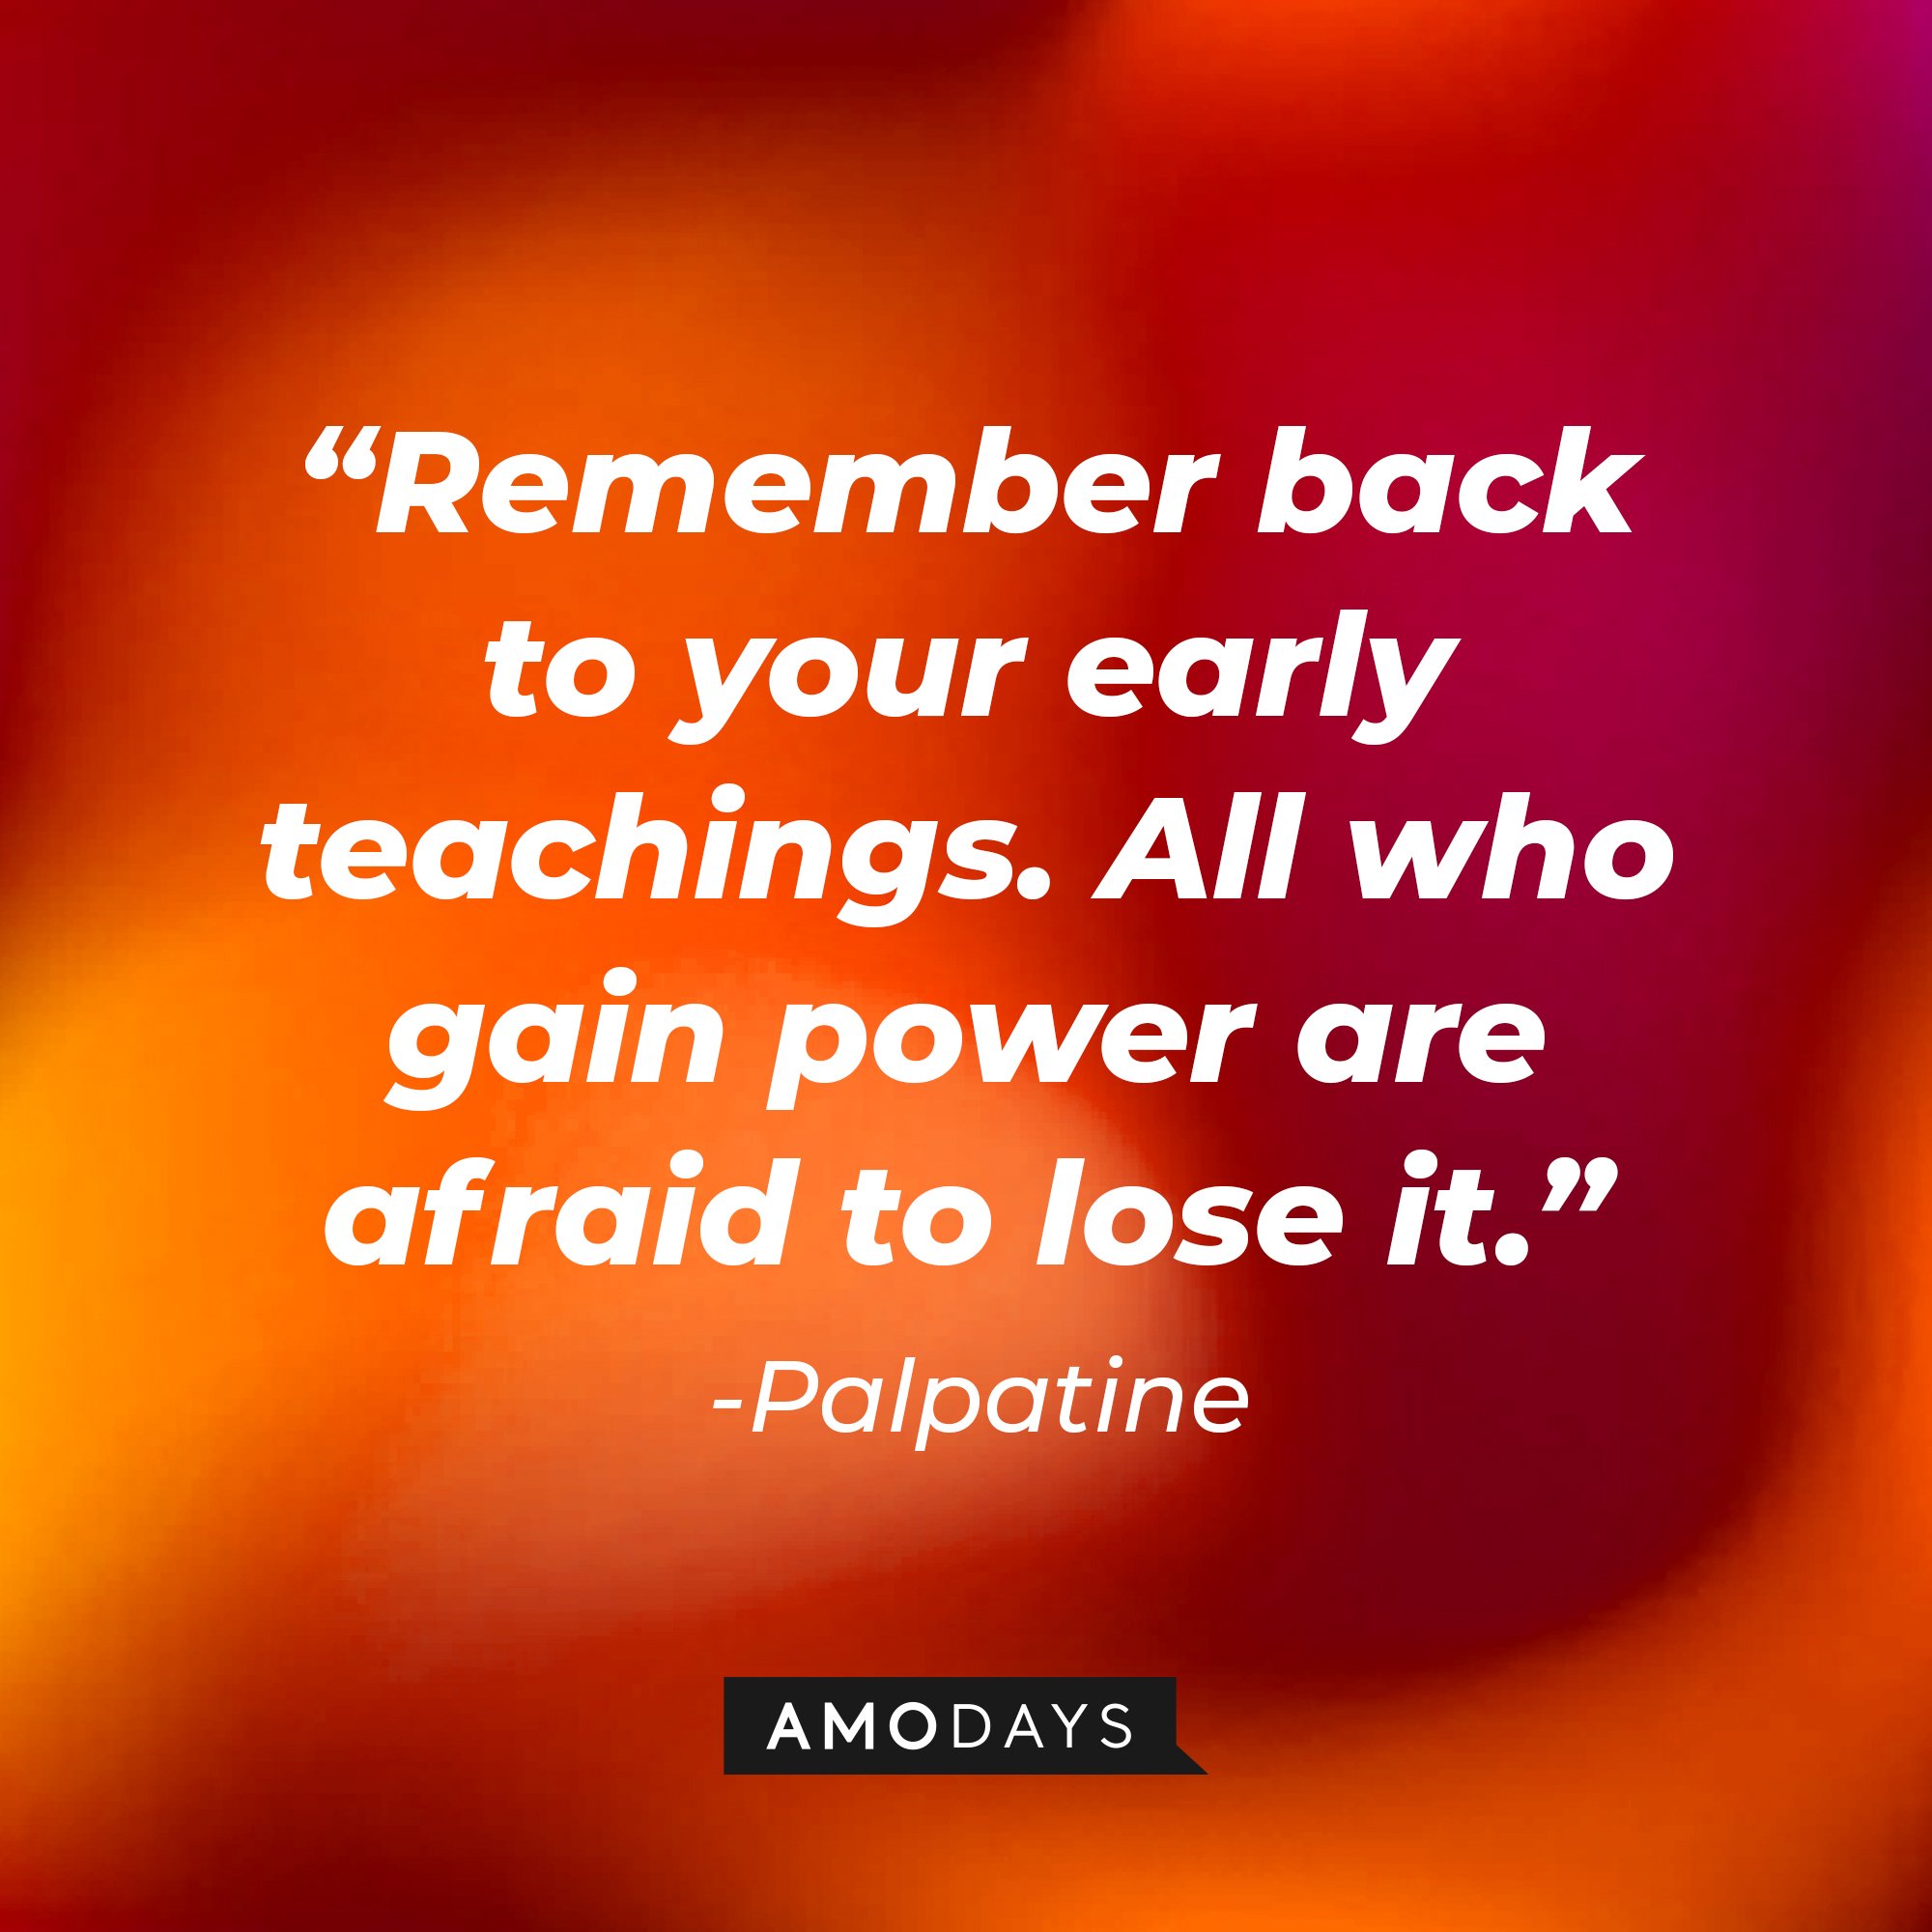 Palpatine's quote: “Remember back to your early teachings. All who gain power are afraid to lose it.” | Image: AmoDays